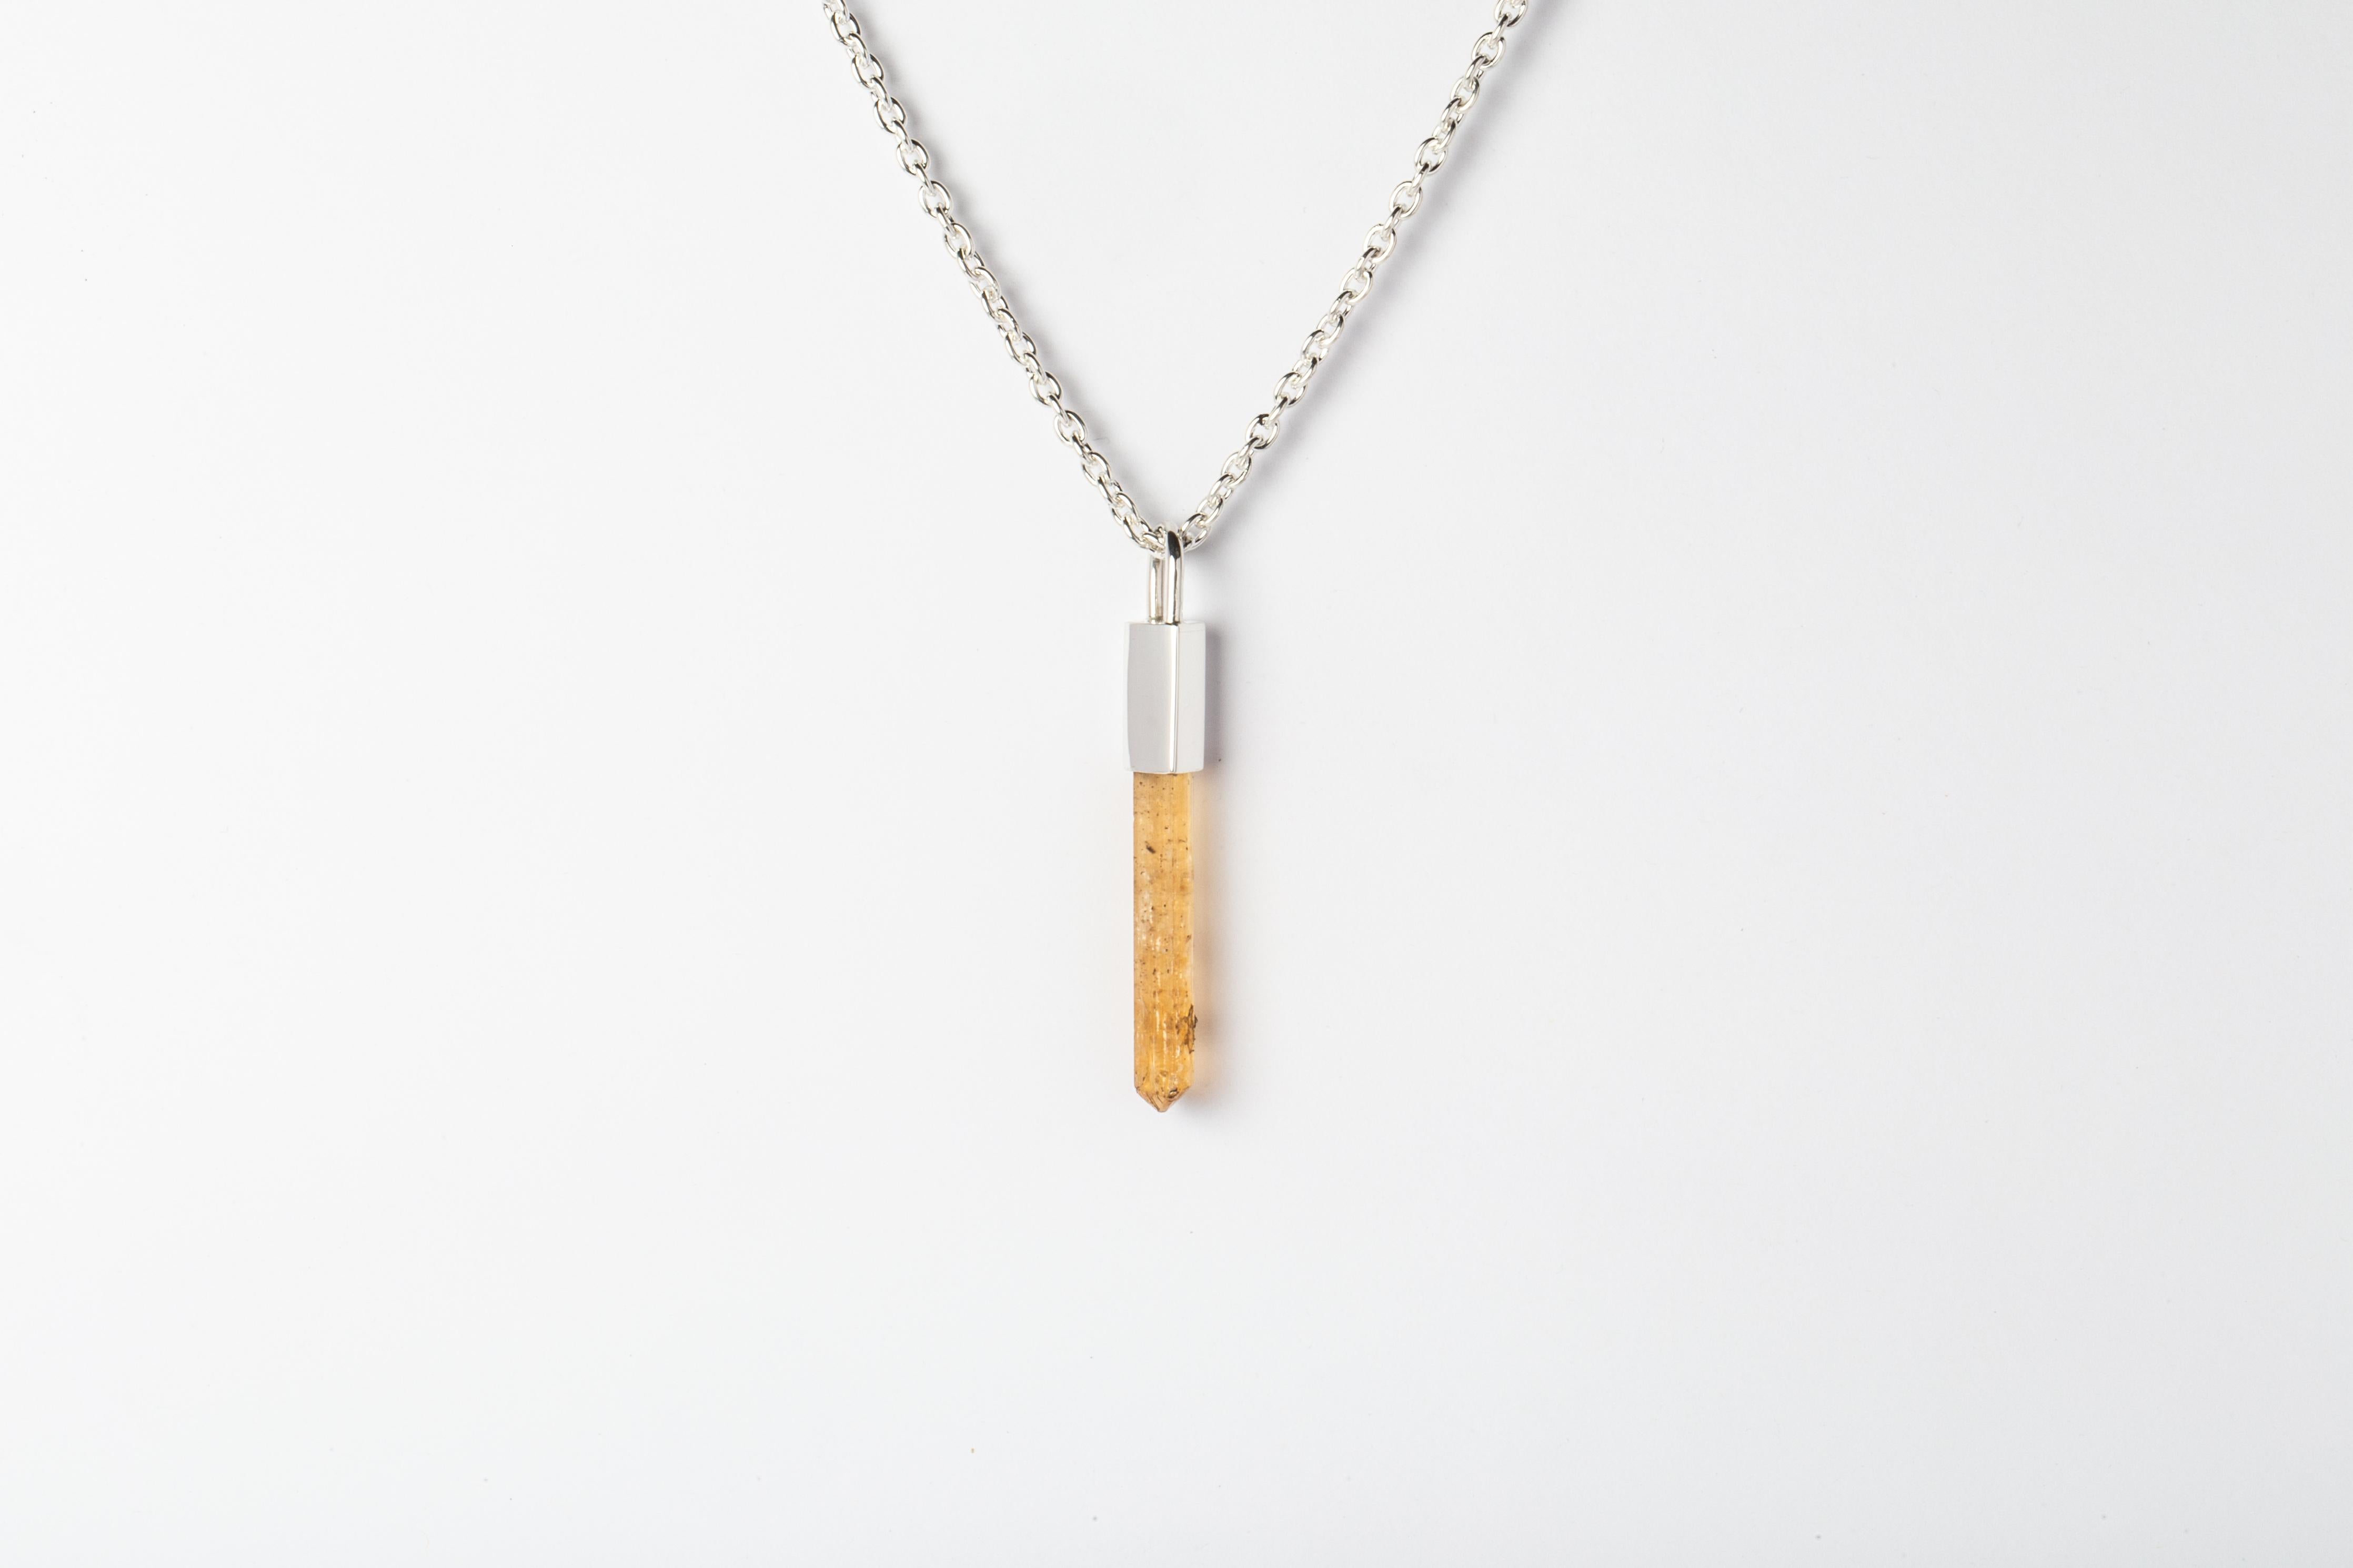 Necklace in polished sterling silver and a rough of imperial topaz. The Talisman series is an exploration into the power of natural crystals. The crystals used in these pieces are discovered through adventure and are hand selected. Each piece is